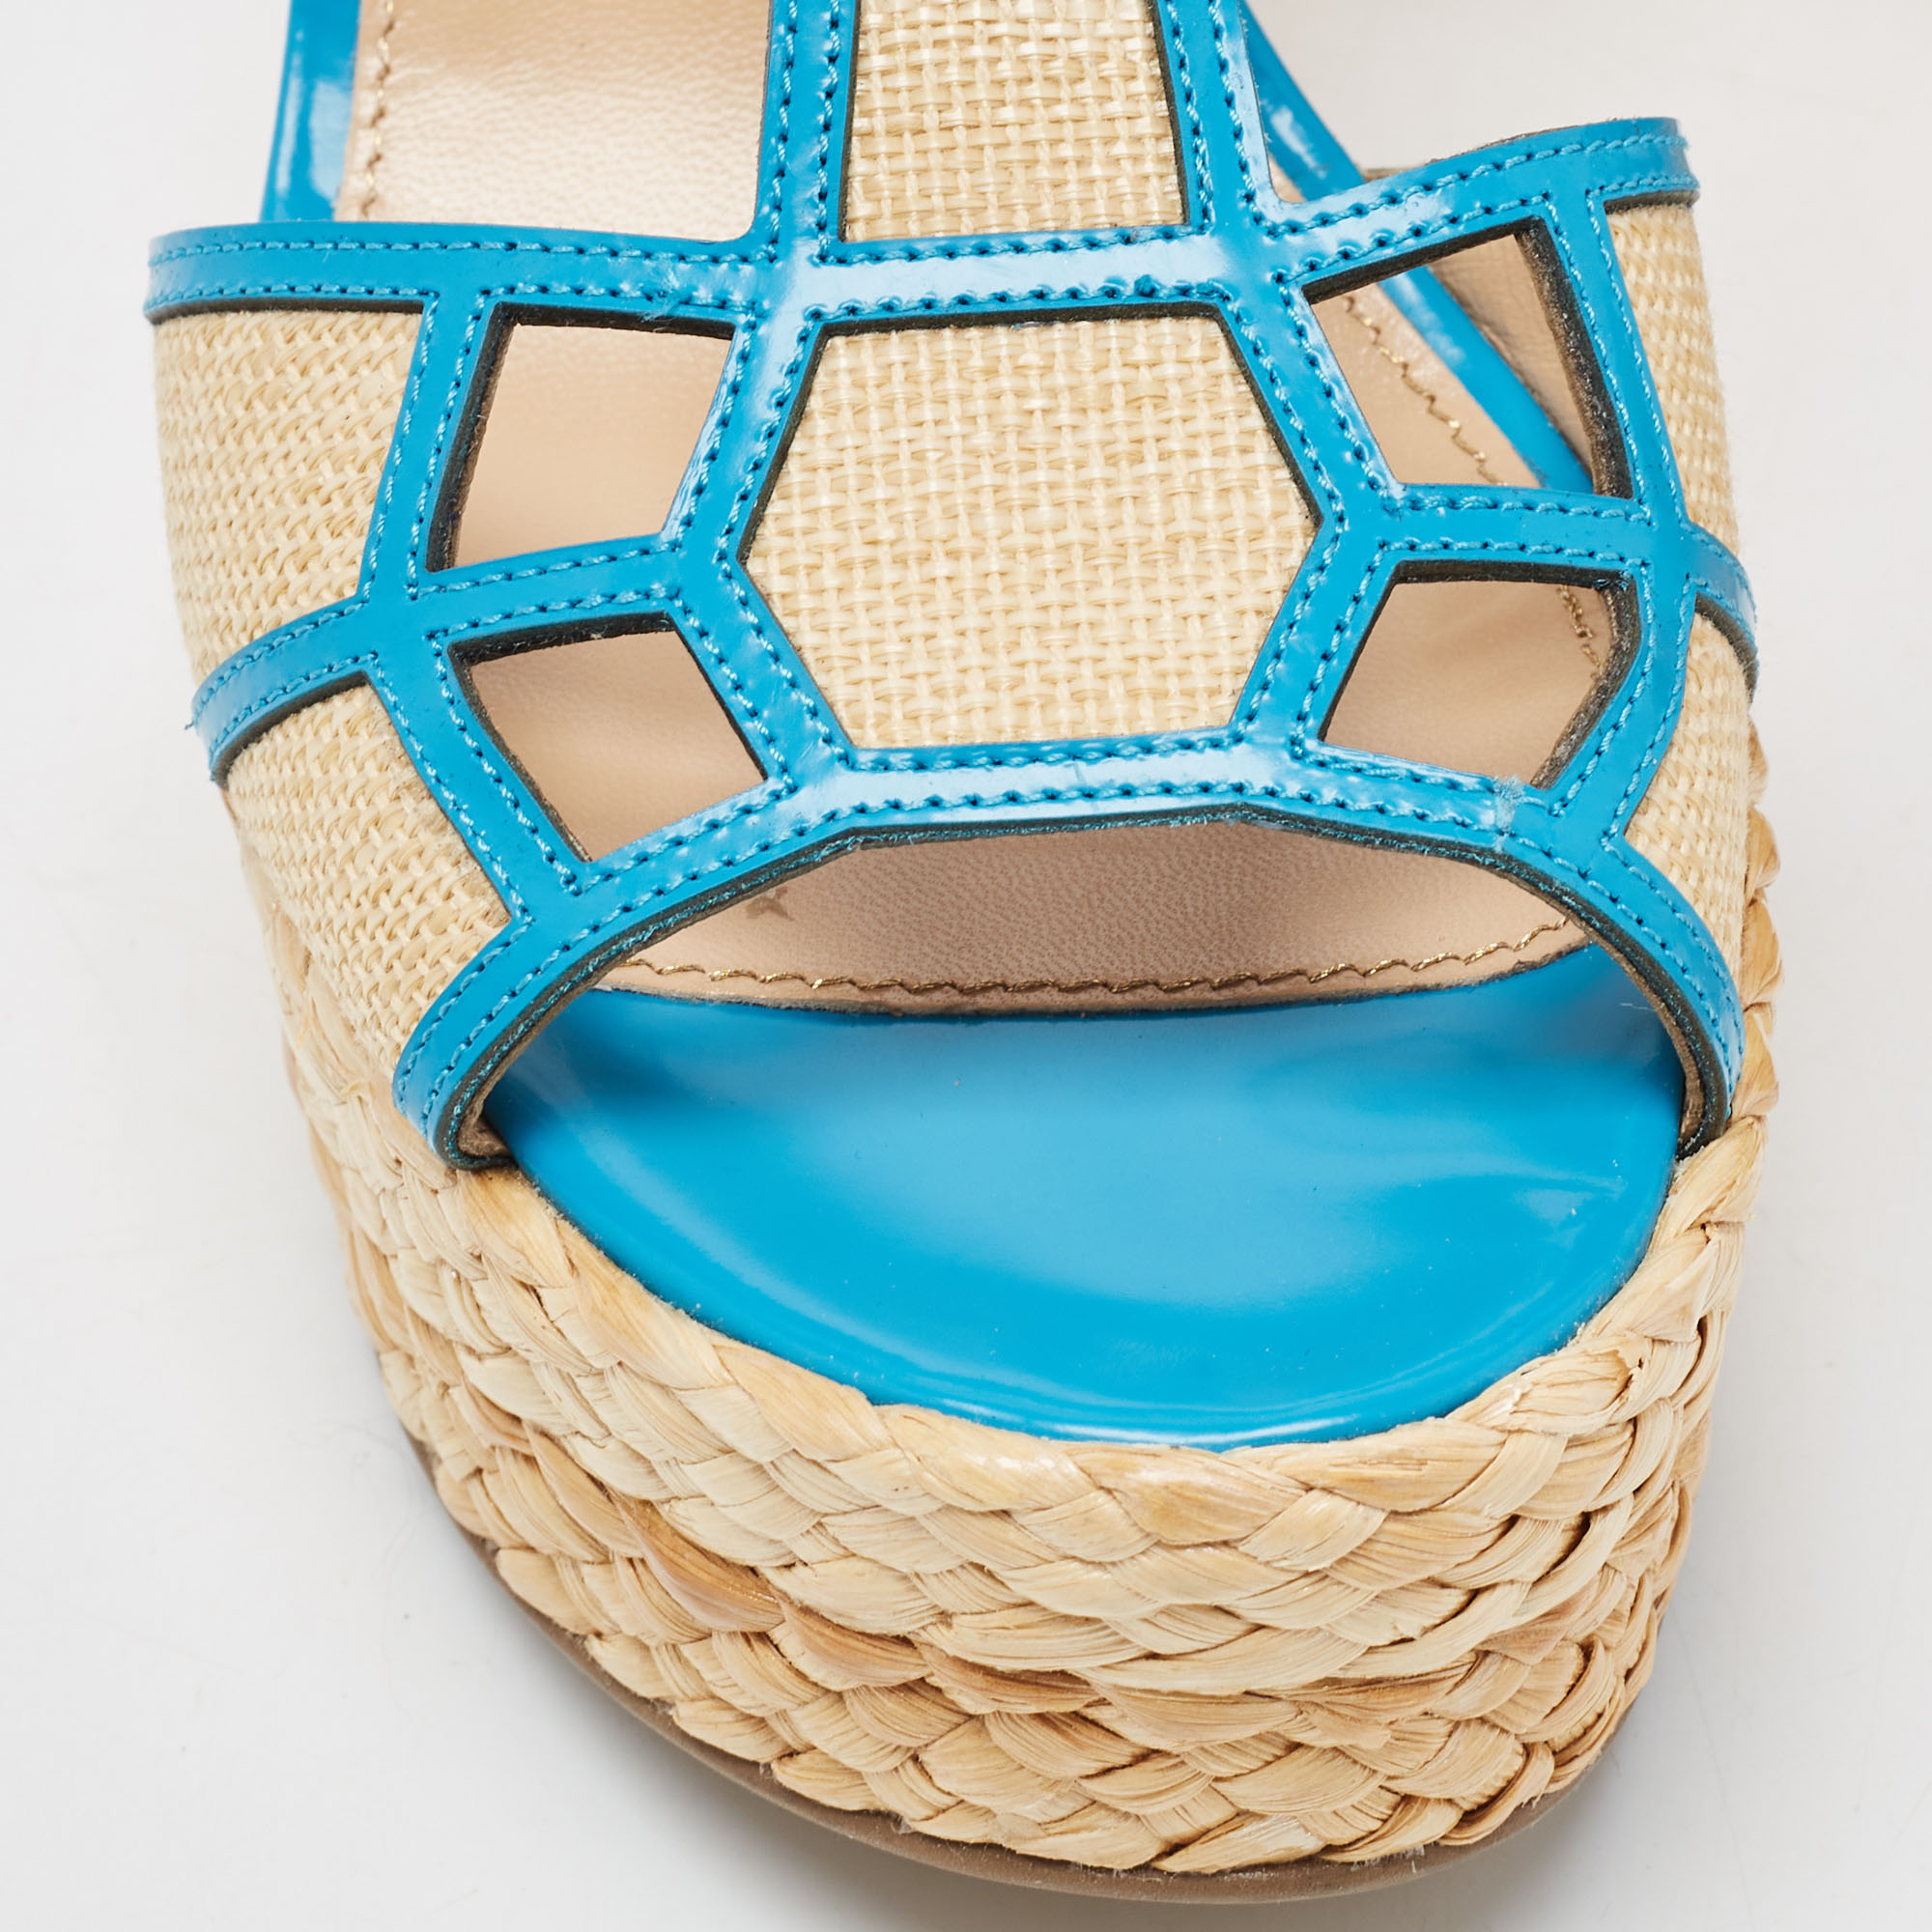 Sergio Rossi Blue/Beige Leather And Raffia Ankle Strap Espadrille Wedge Sandals Size 39.5